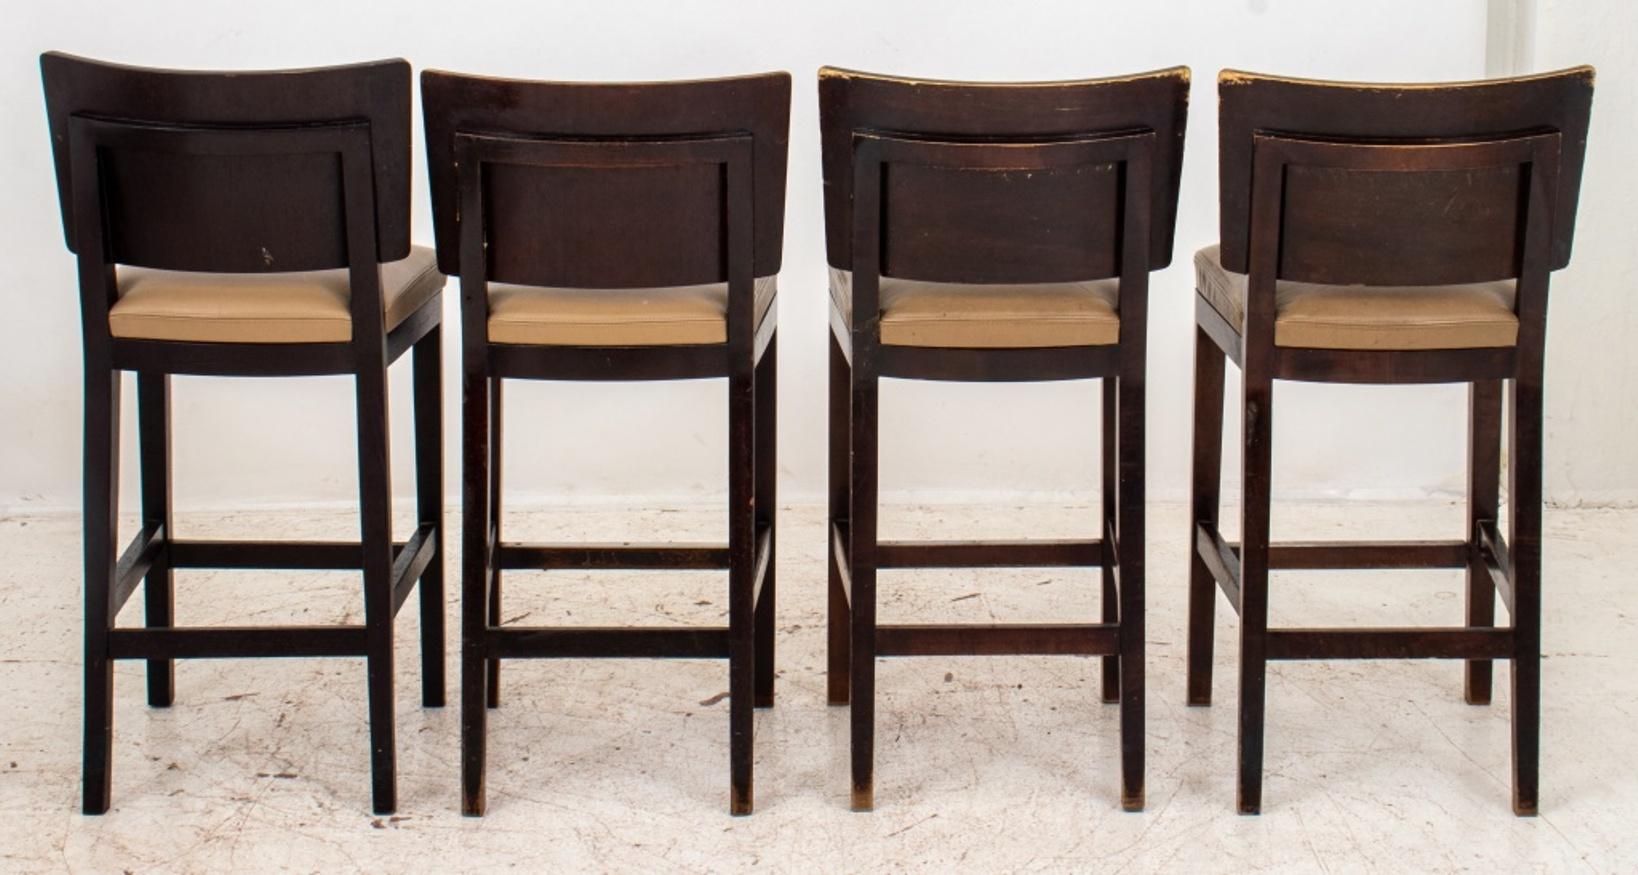 20th Century Christian Liaigre, Mercer Hotel Bar Chairs, Set of 4